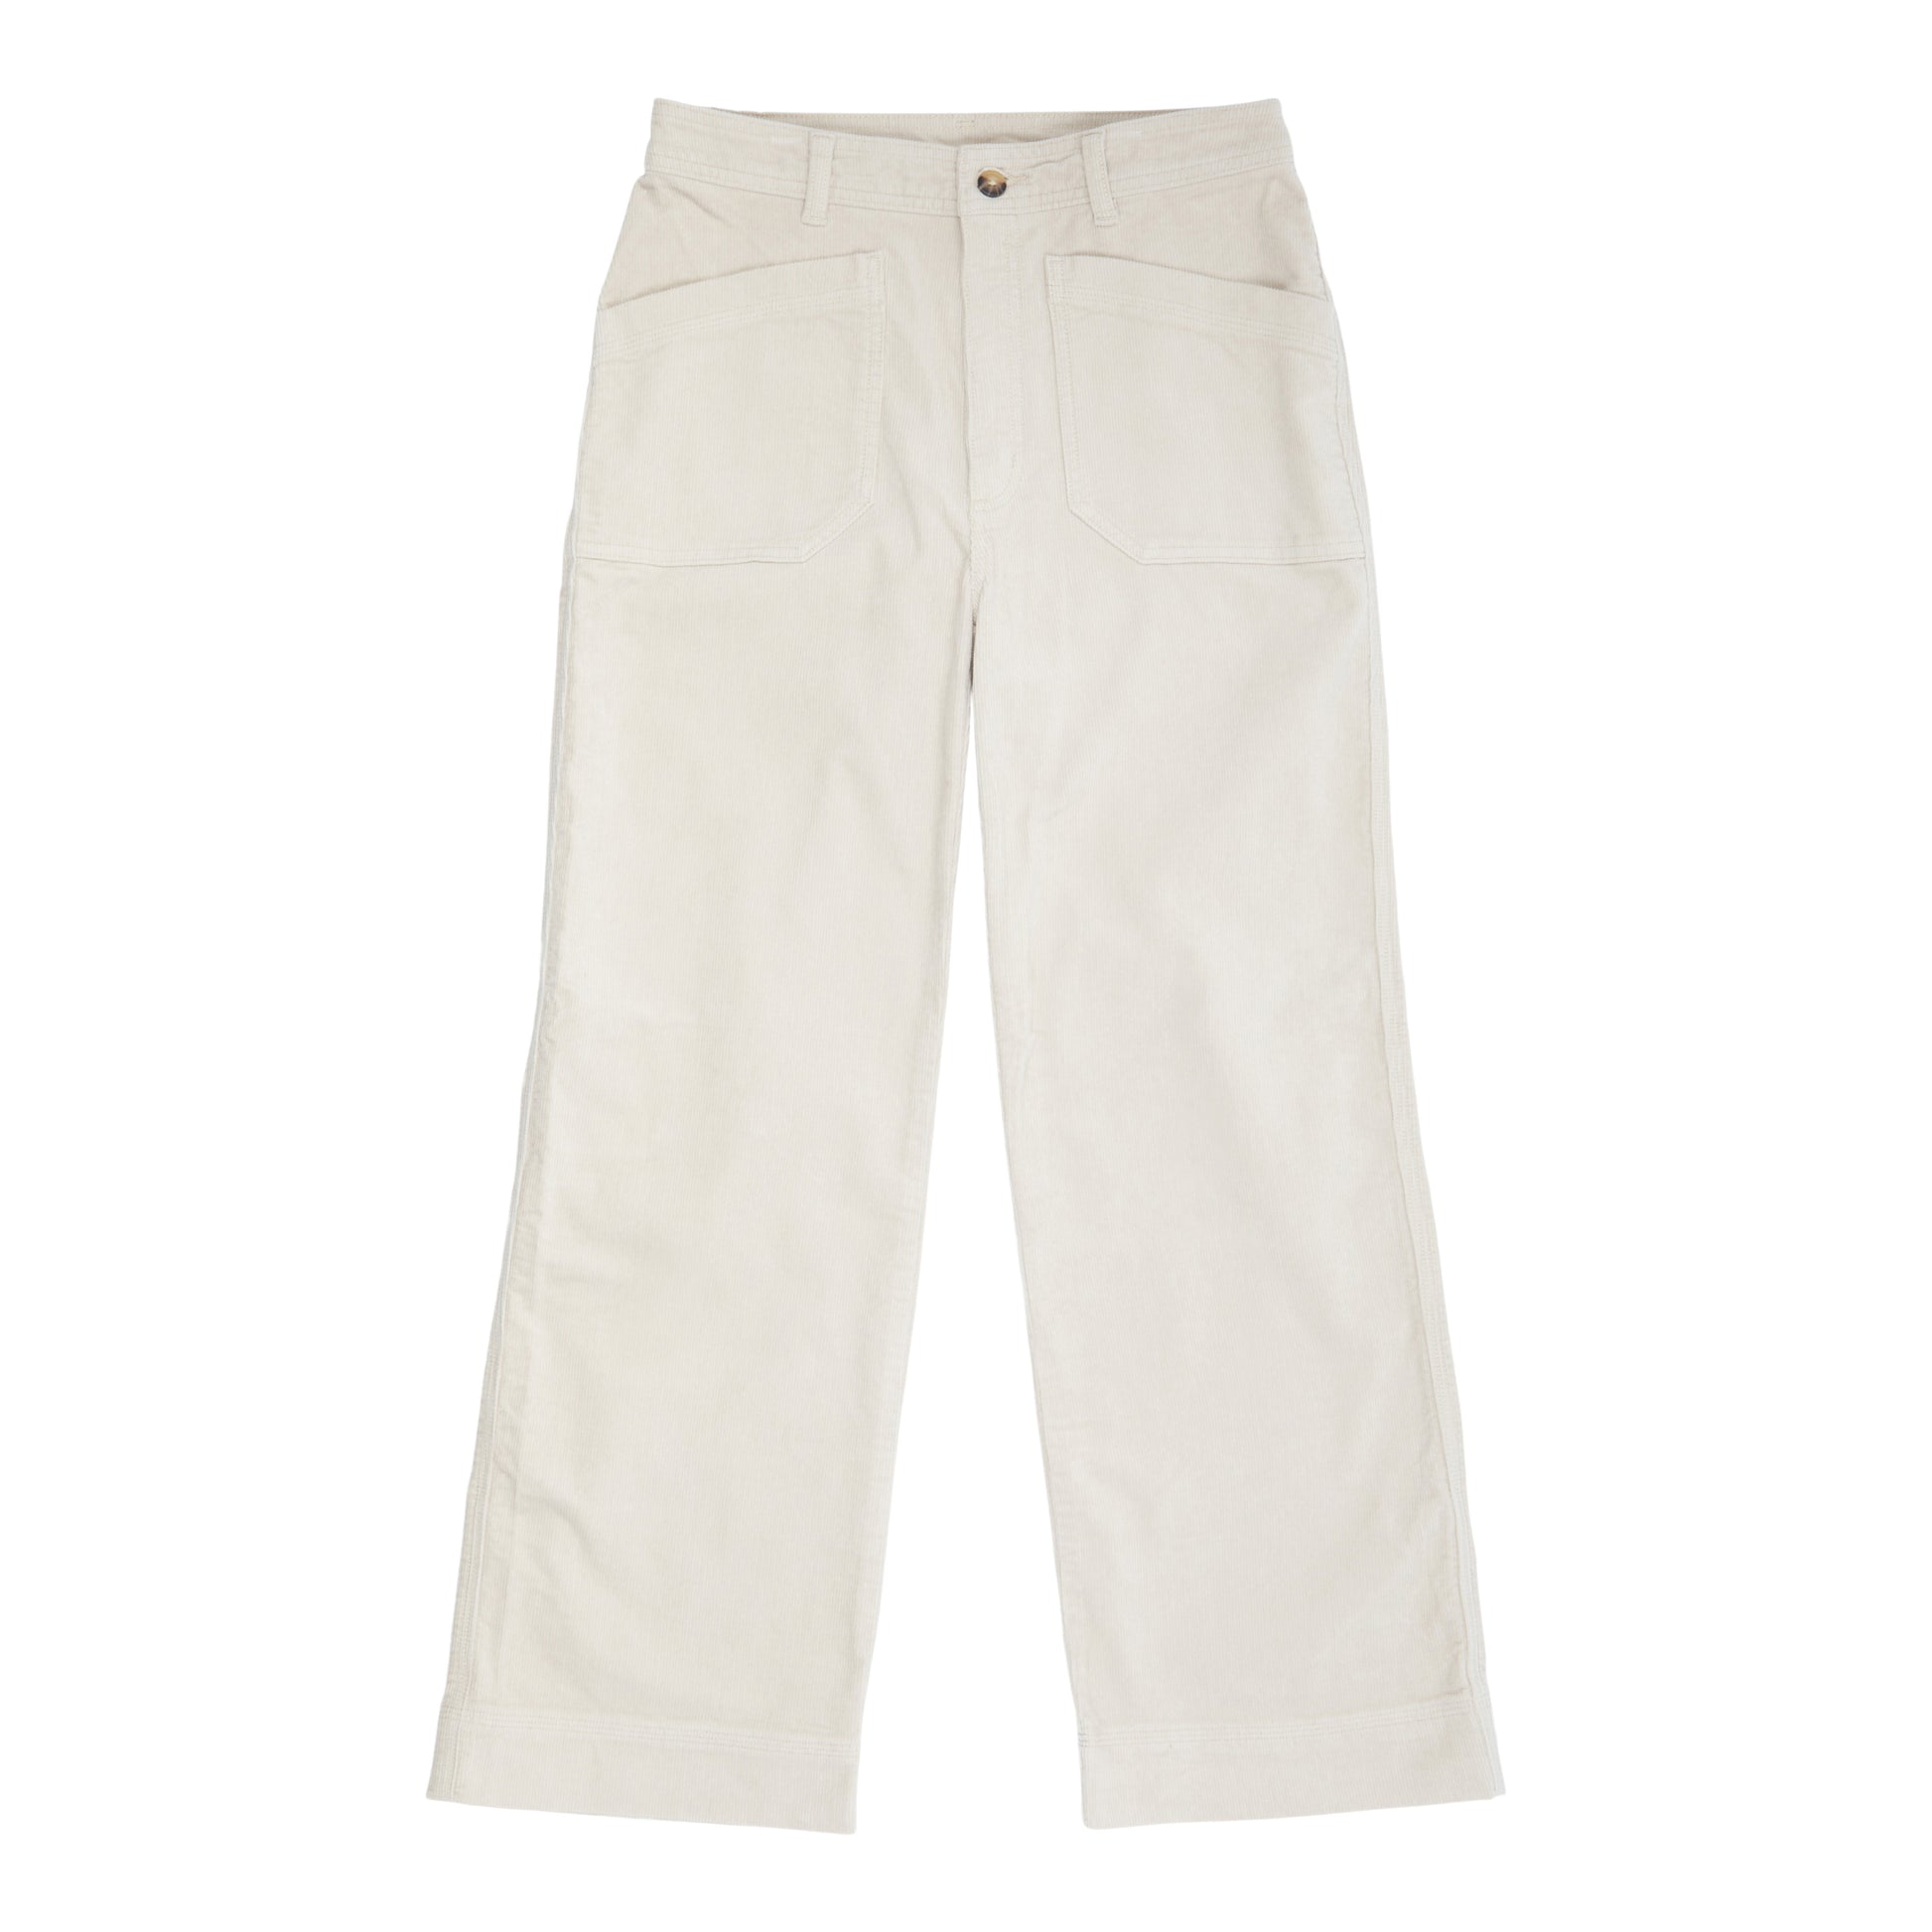 Topshop cord utility straight leg pants in baby blue